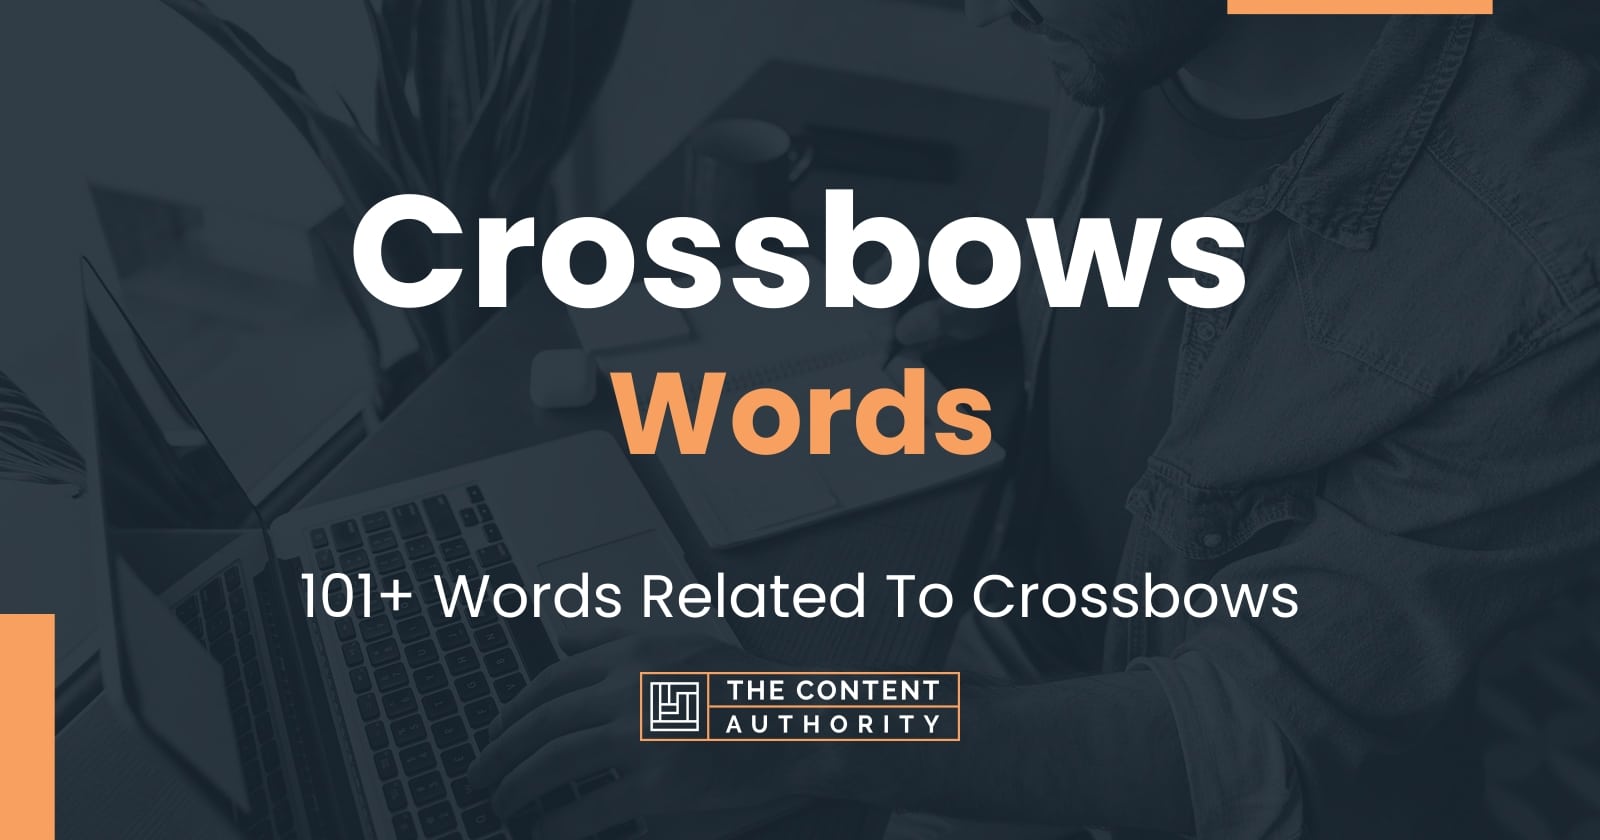 Crossbows Words - 101+ Words Related To Crossbows